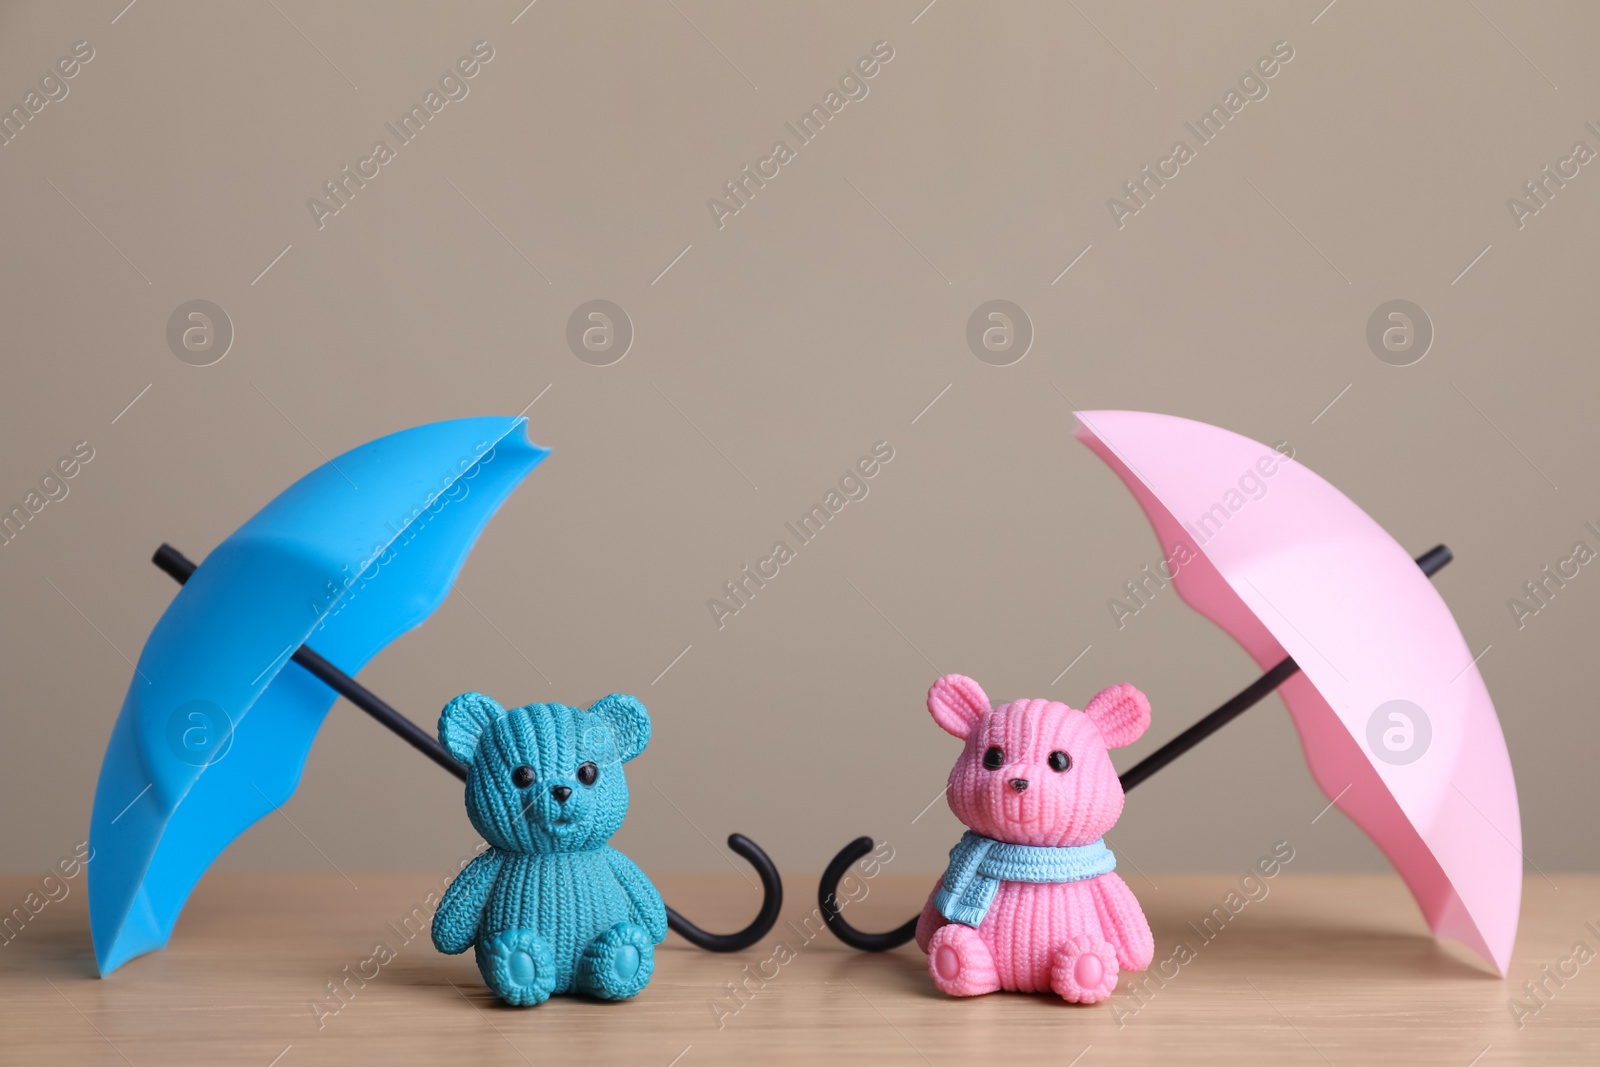 Photo of Small umbrellas and toy bears on wooden table